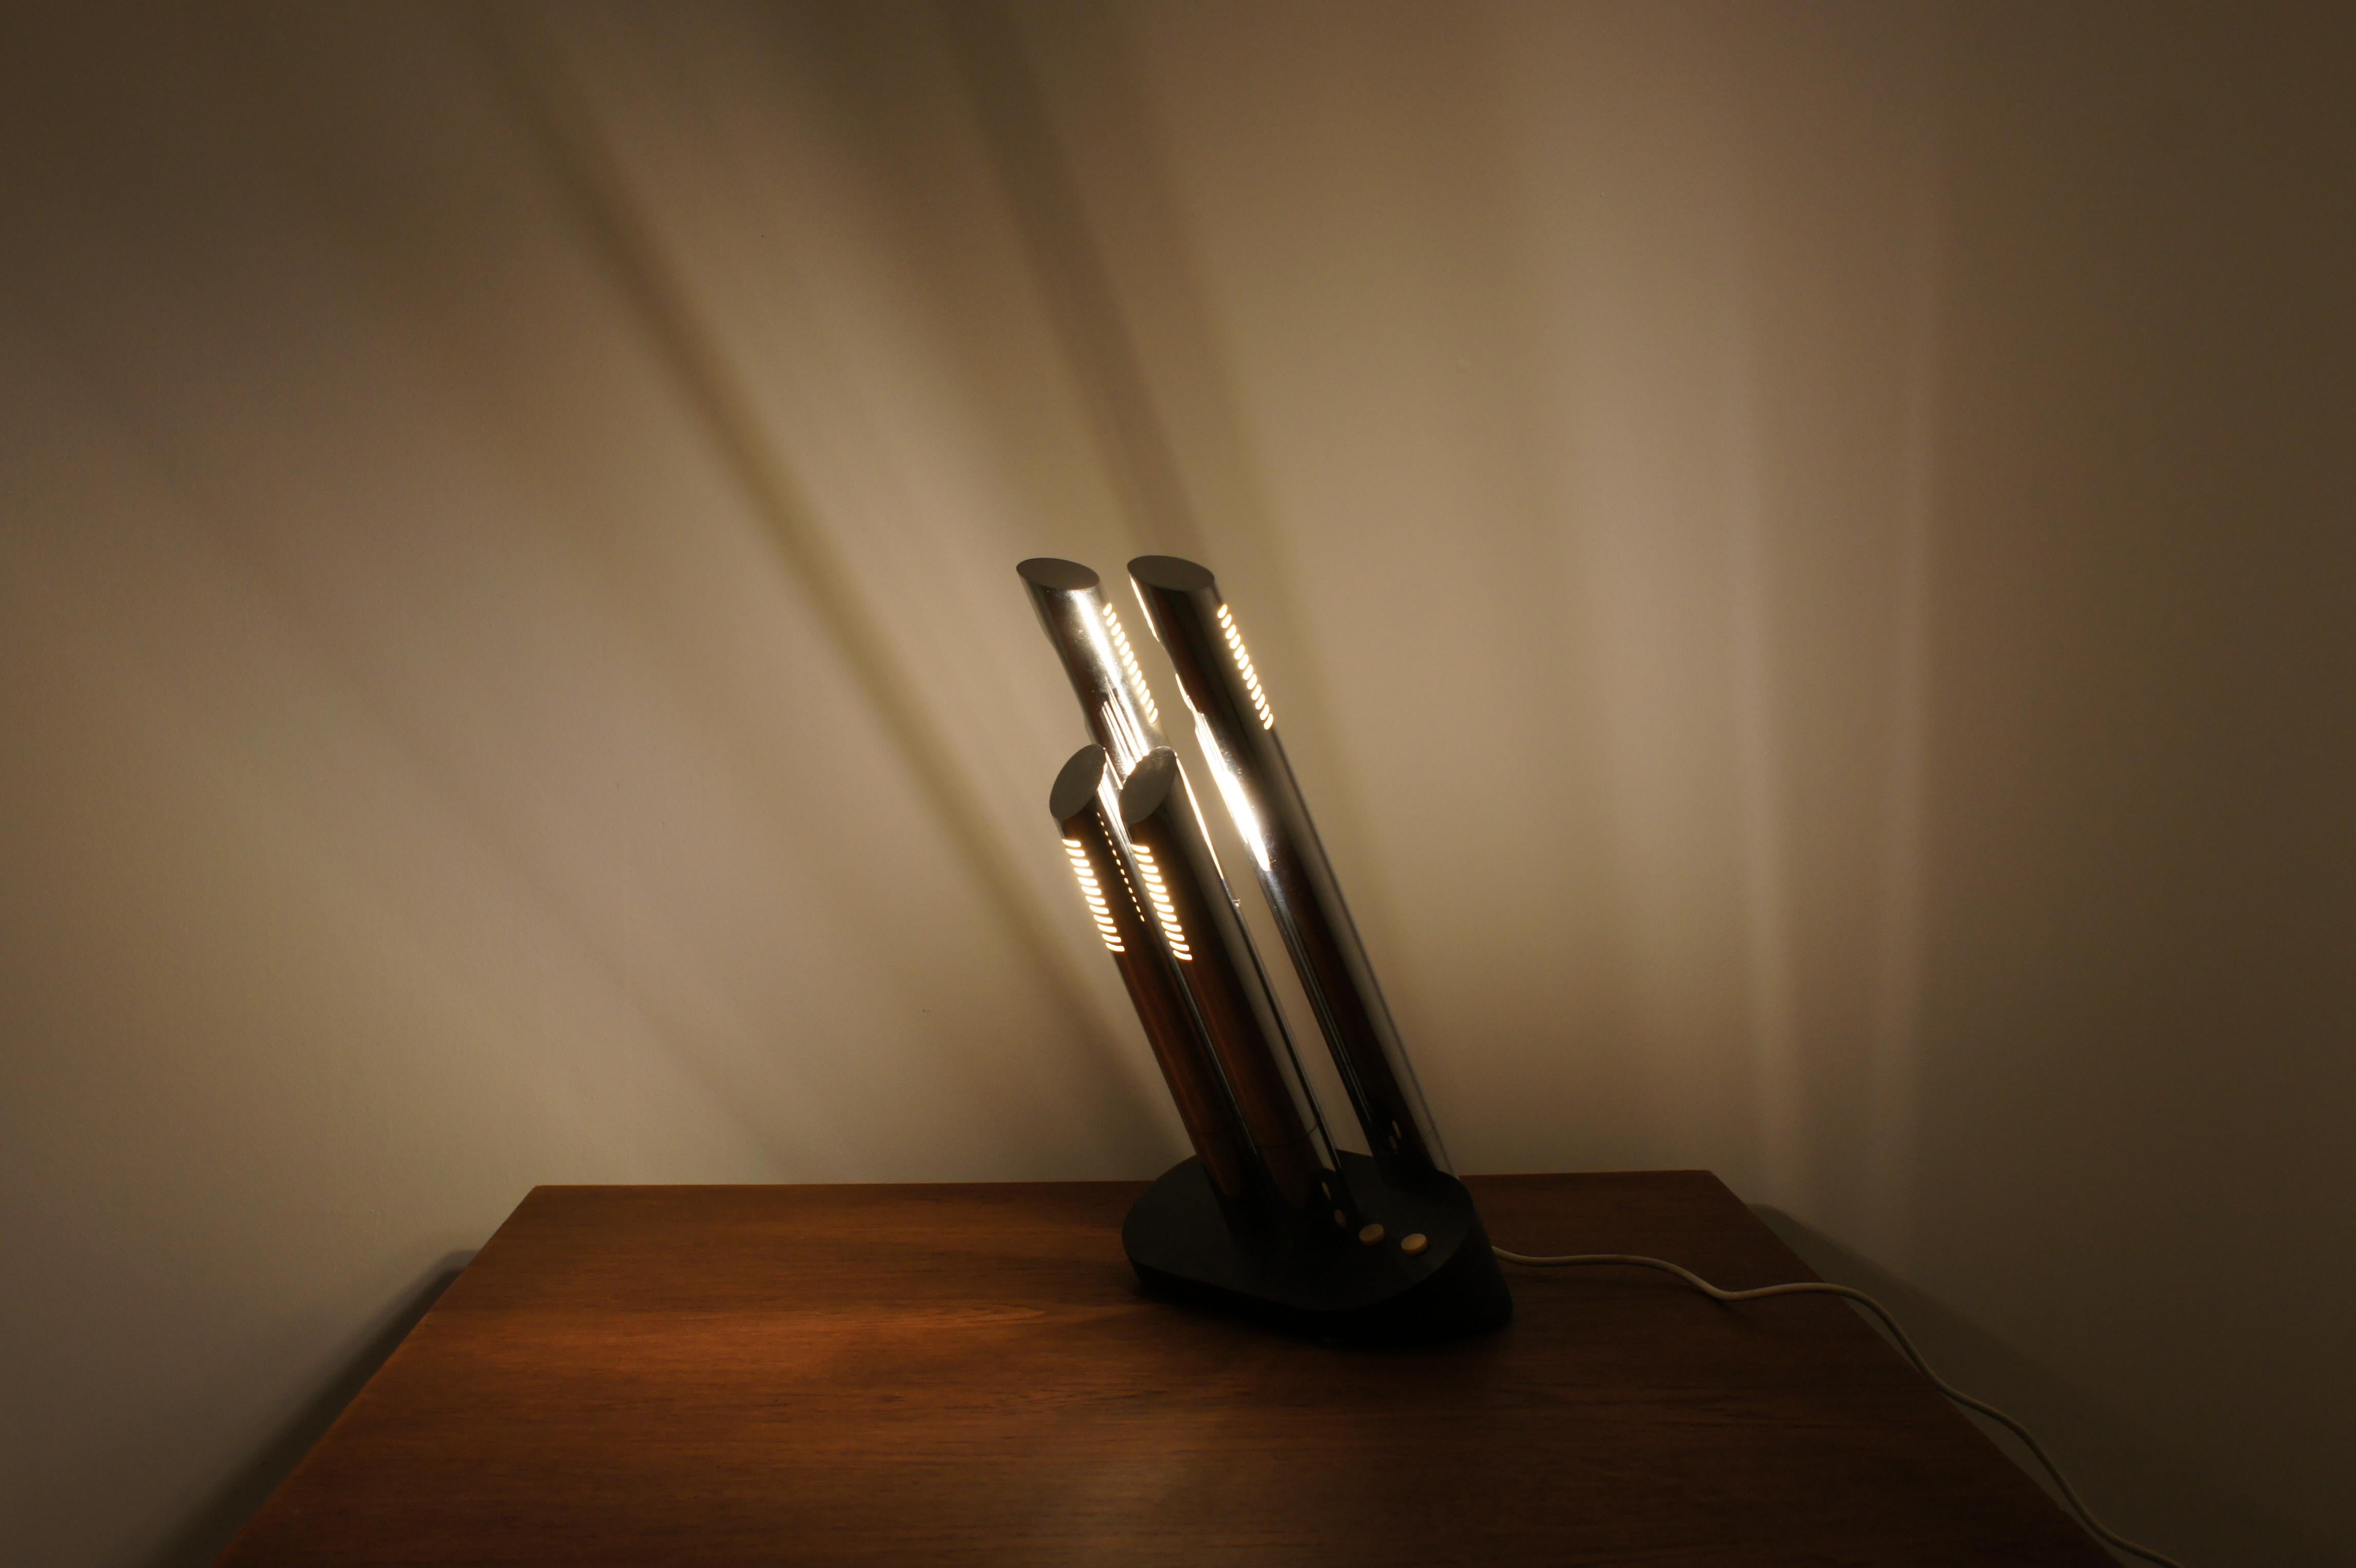 Table lamp produced by 'luci illuminazione' designed by Mario Faggian in the 1970s.

Model T443 , also called 'president lamp'.

Four swiveling light sources that can be turned on separately in pairs.

The lamp is preserved,is in excellent